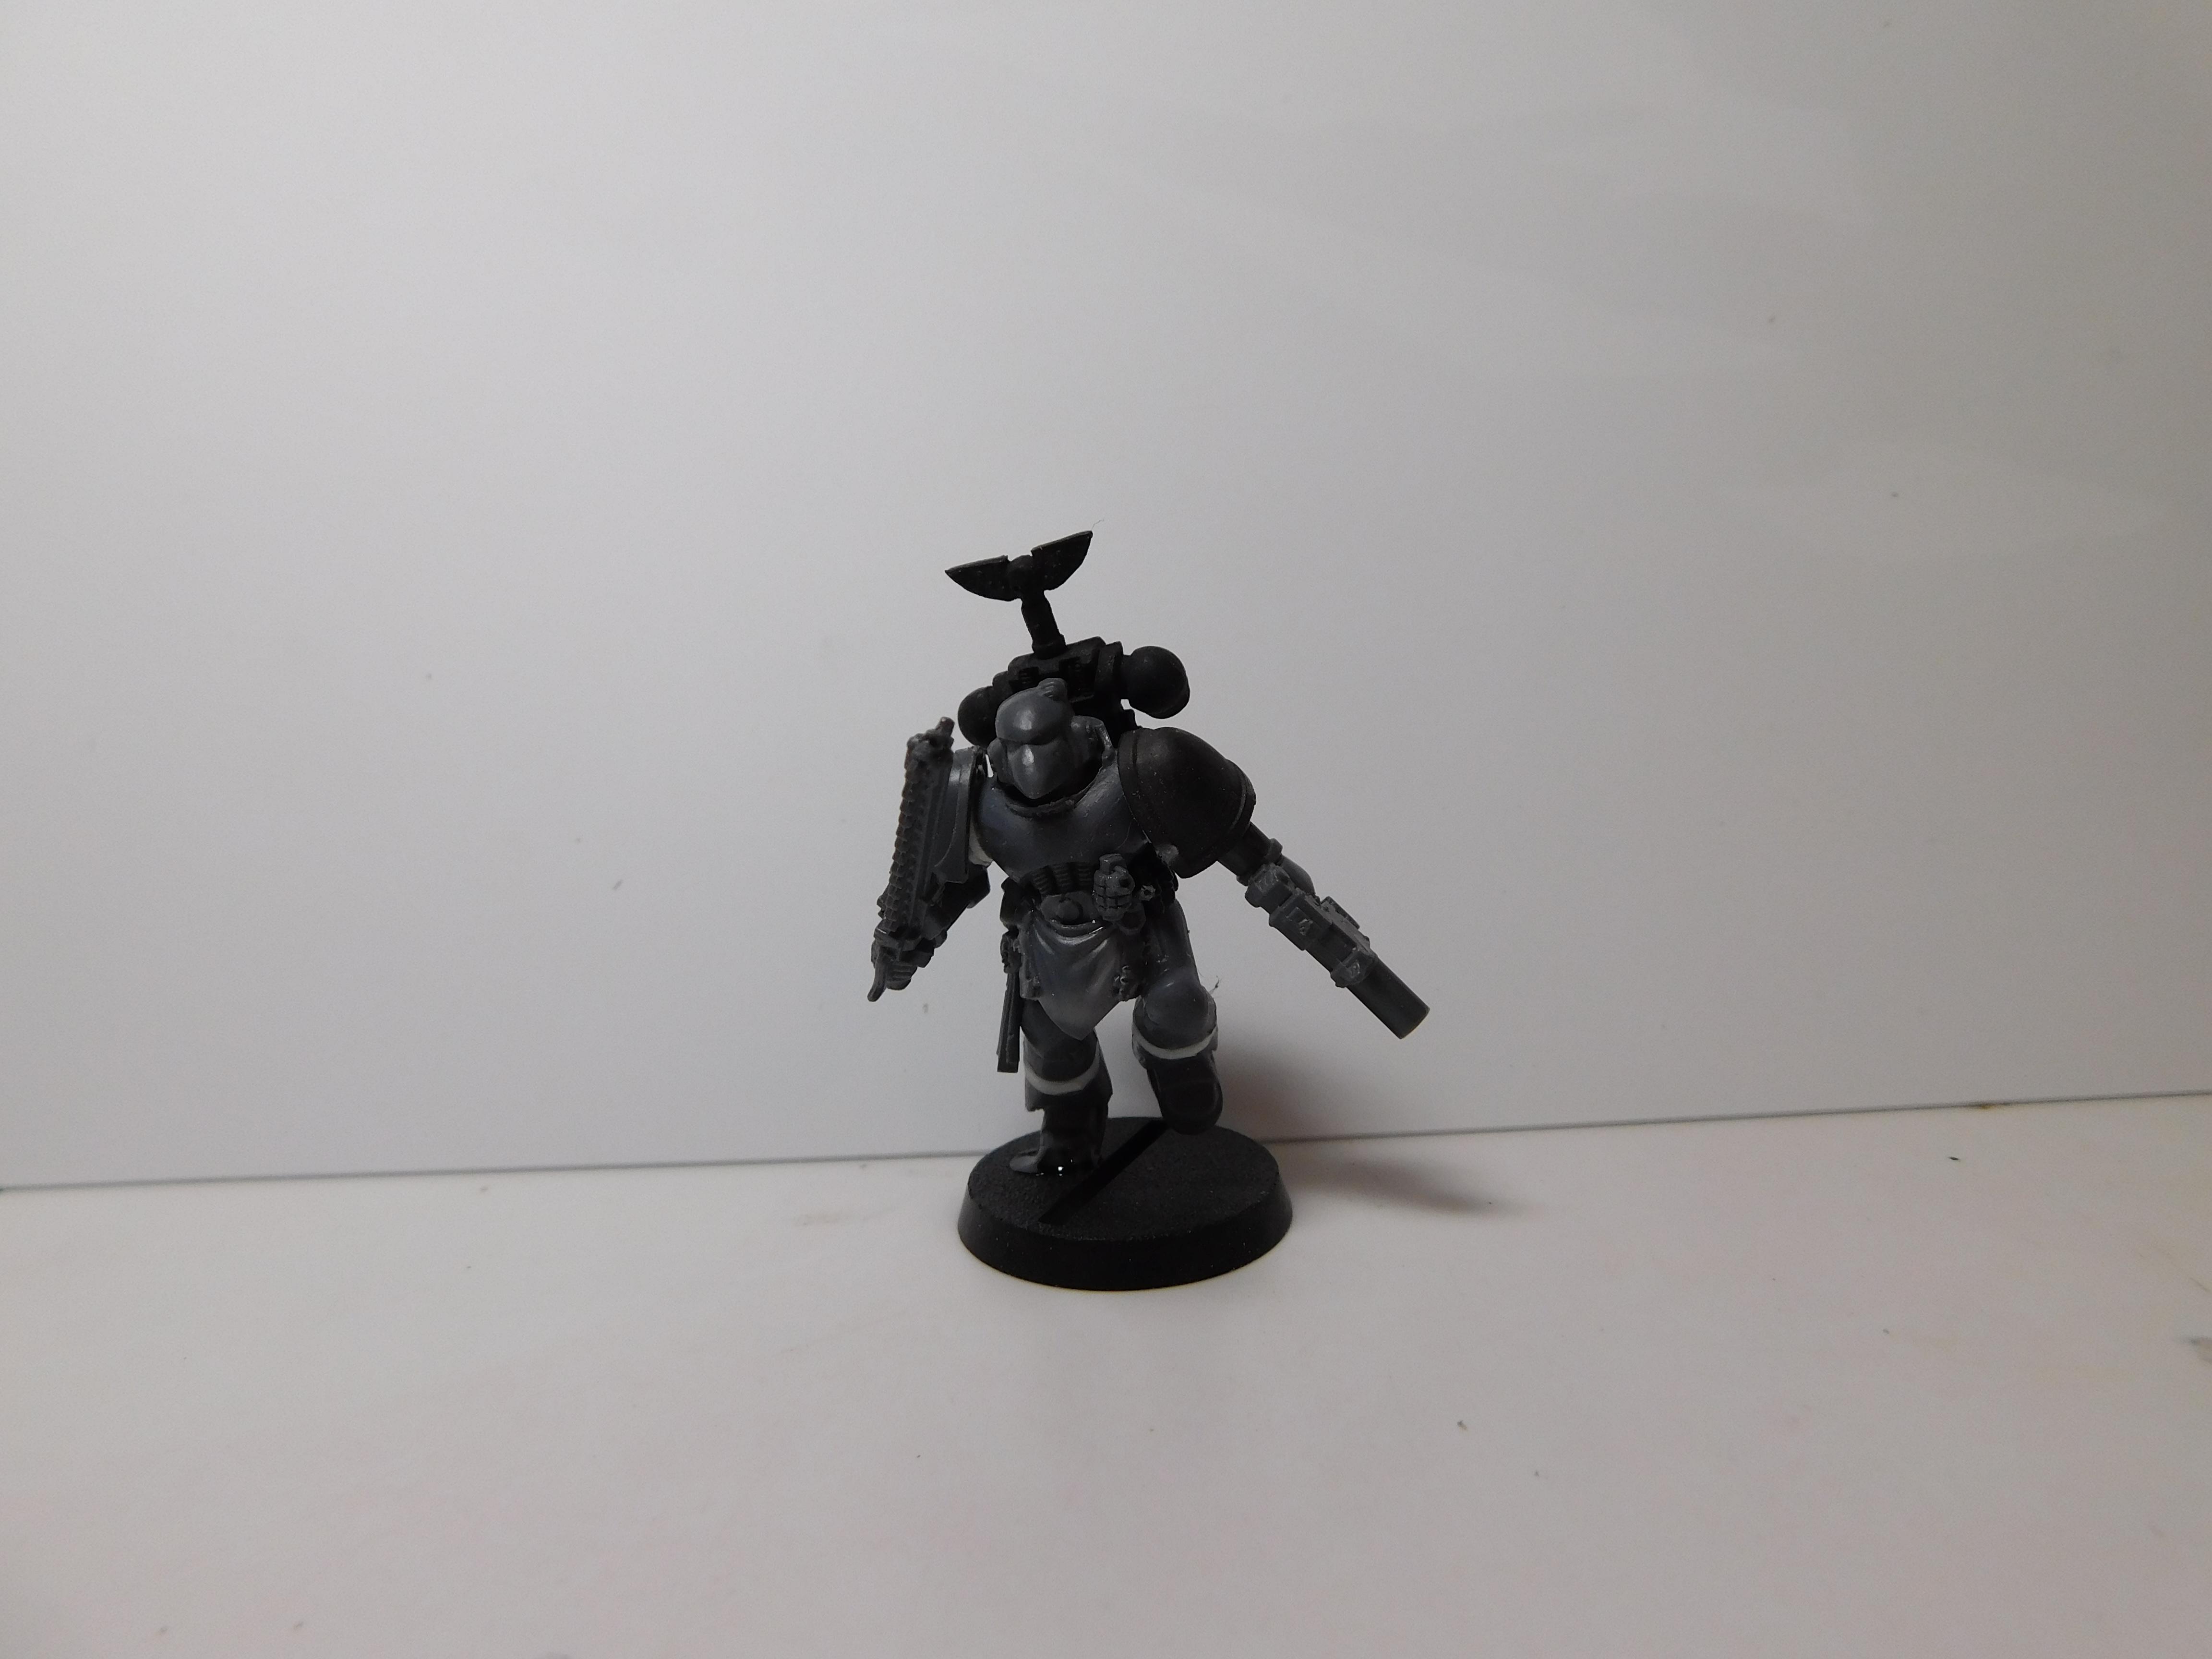 Sergeant Alvarex just recently assumed command of his squad. His diligent service and natural gifts in the art of stealth warfare made his an easy choice for promotion. 